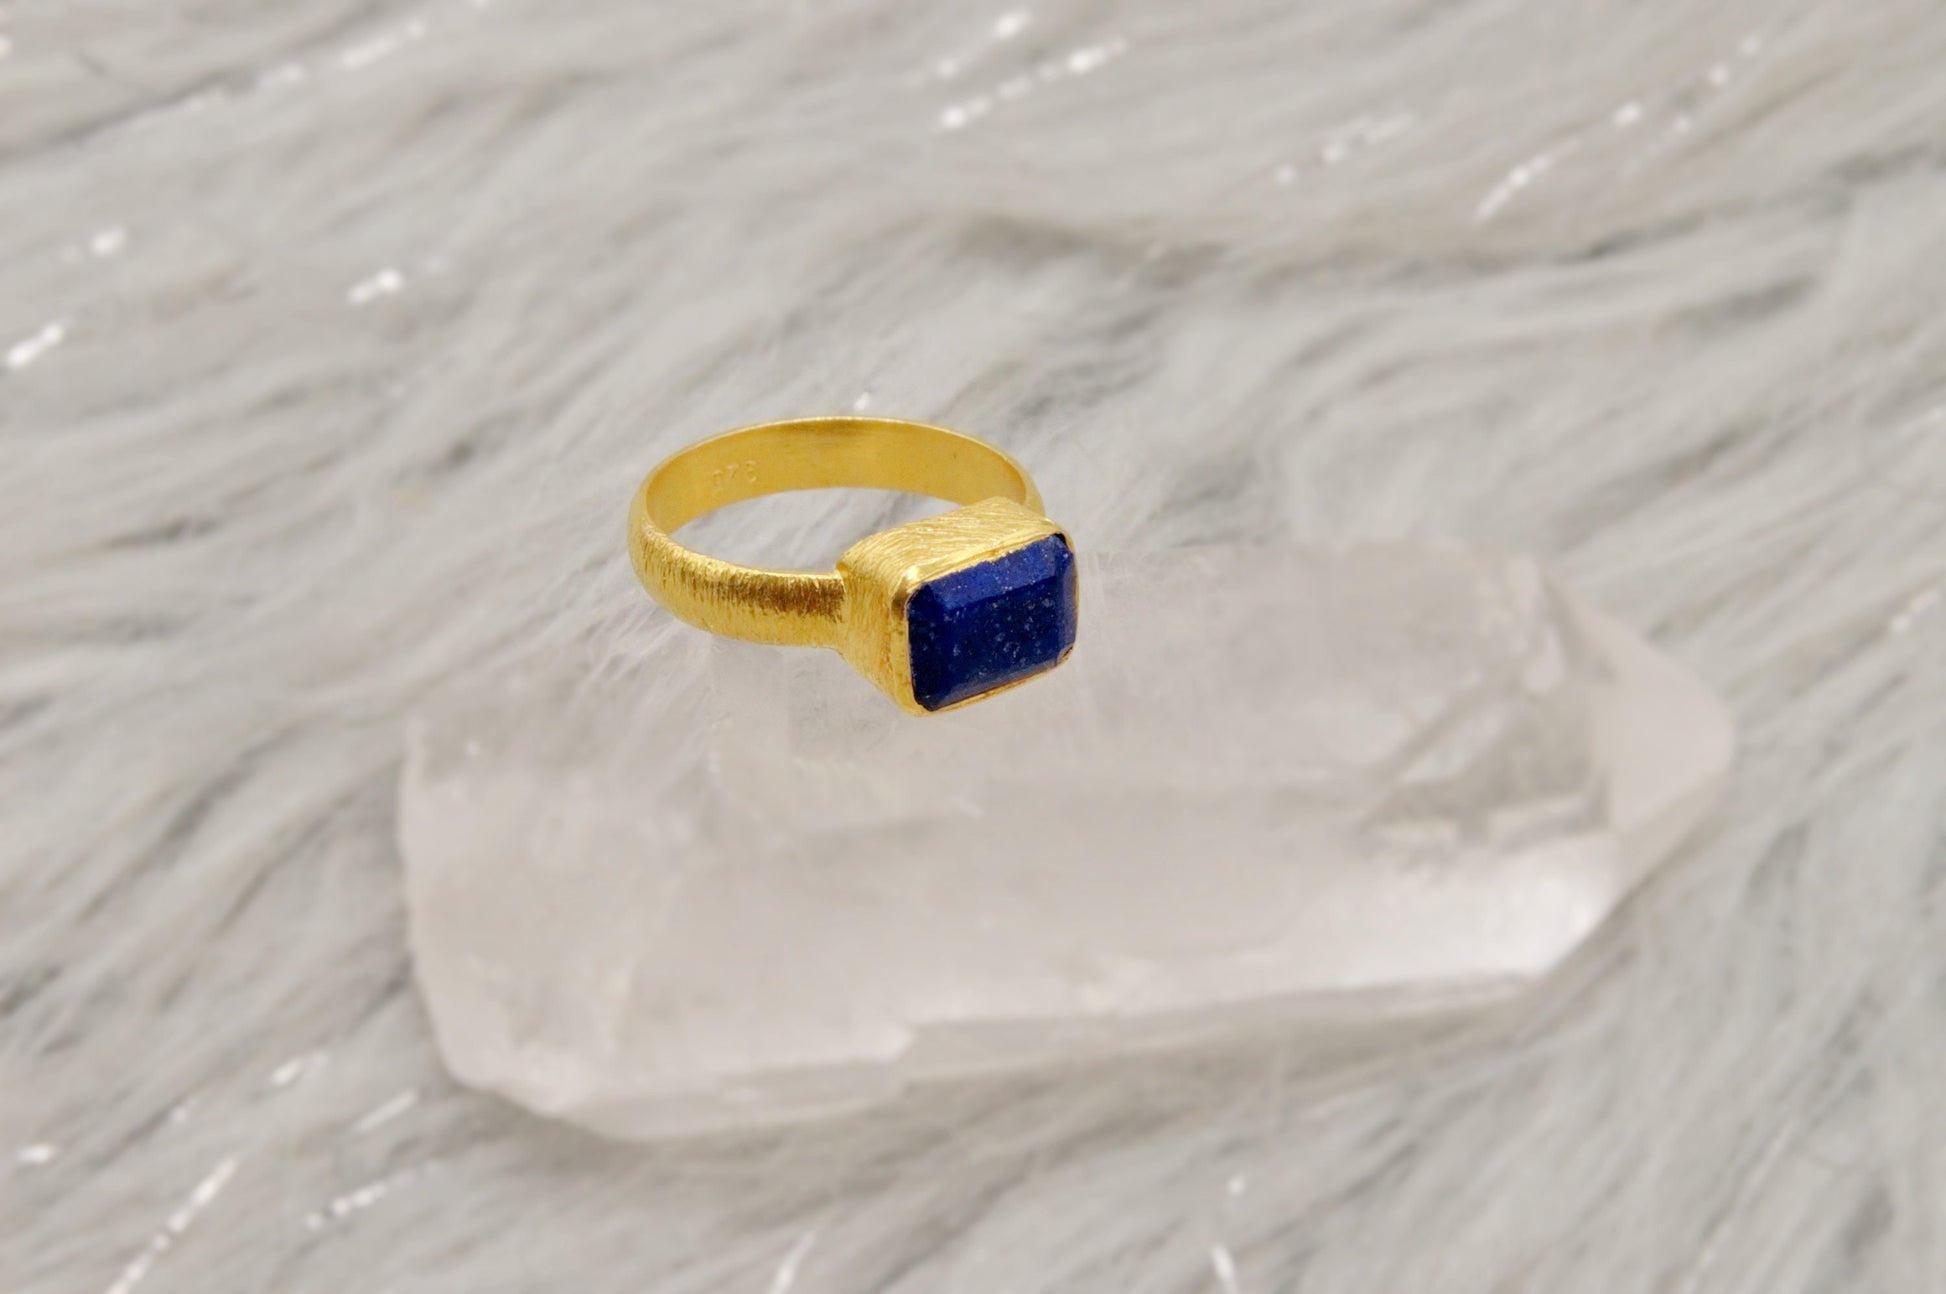 Lapis Lazuli Dainty Gold Ring, Blue Gemstone Ring, Gold Plated 925 Sterling Silver Ring, Birthday Gifts, Rings For Women, birthstone ring